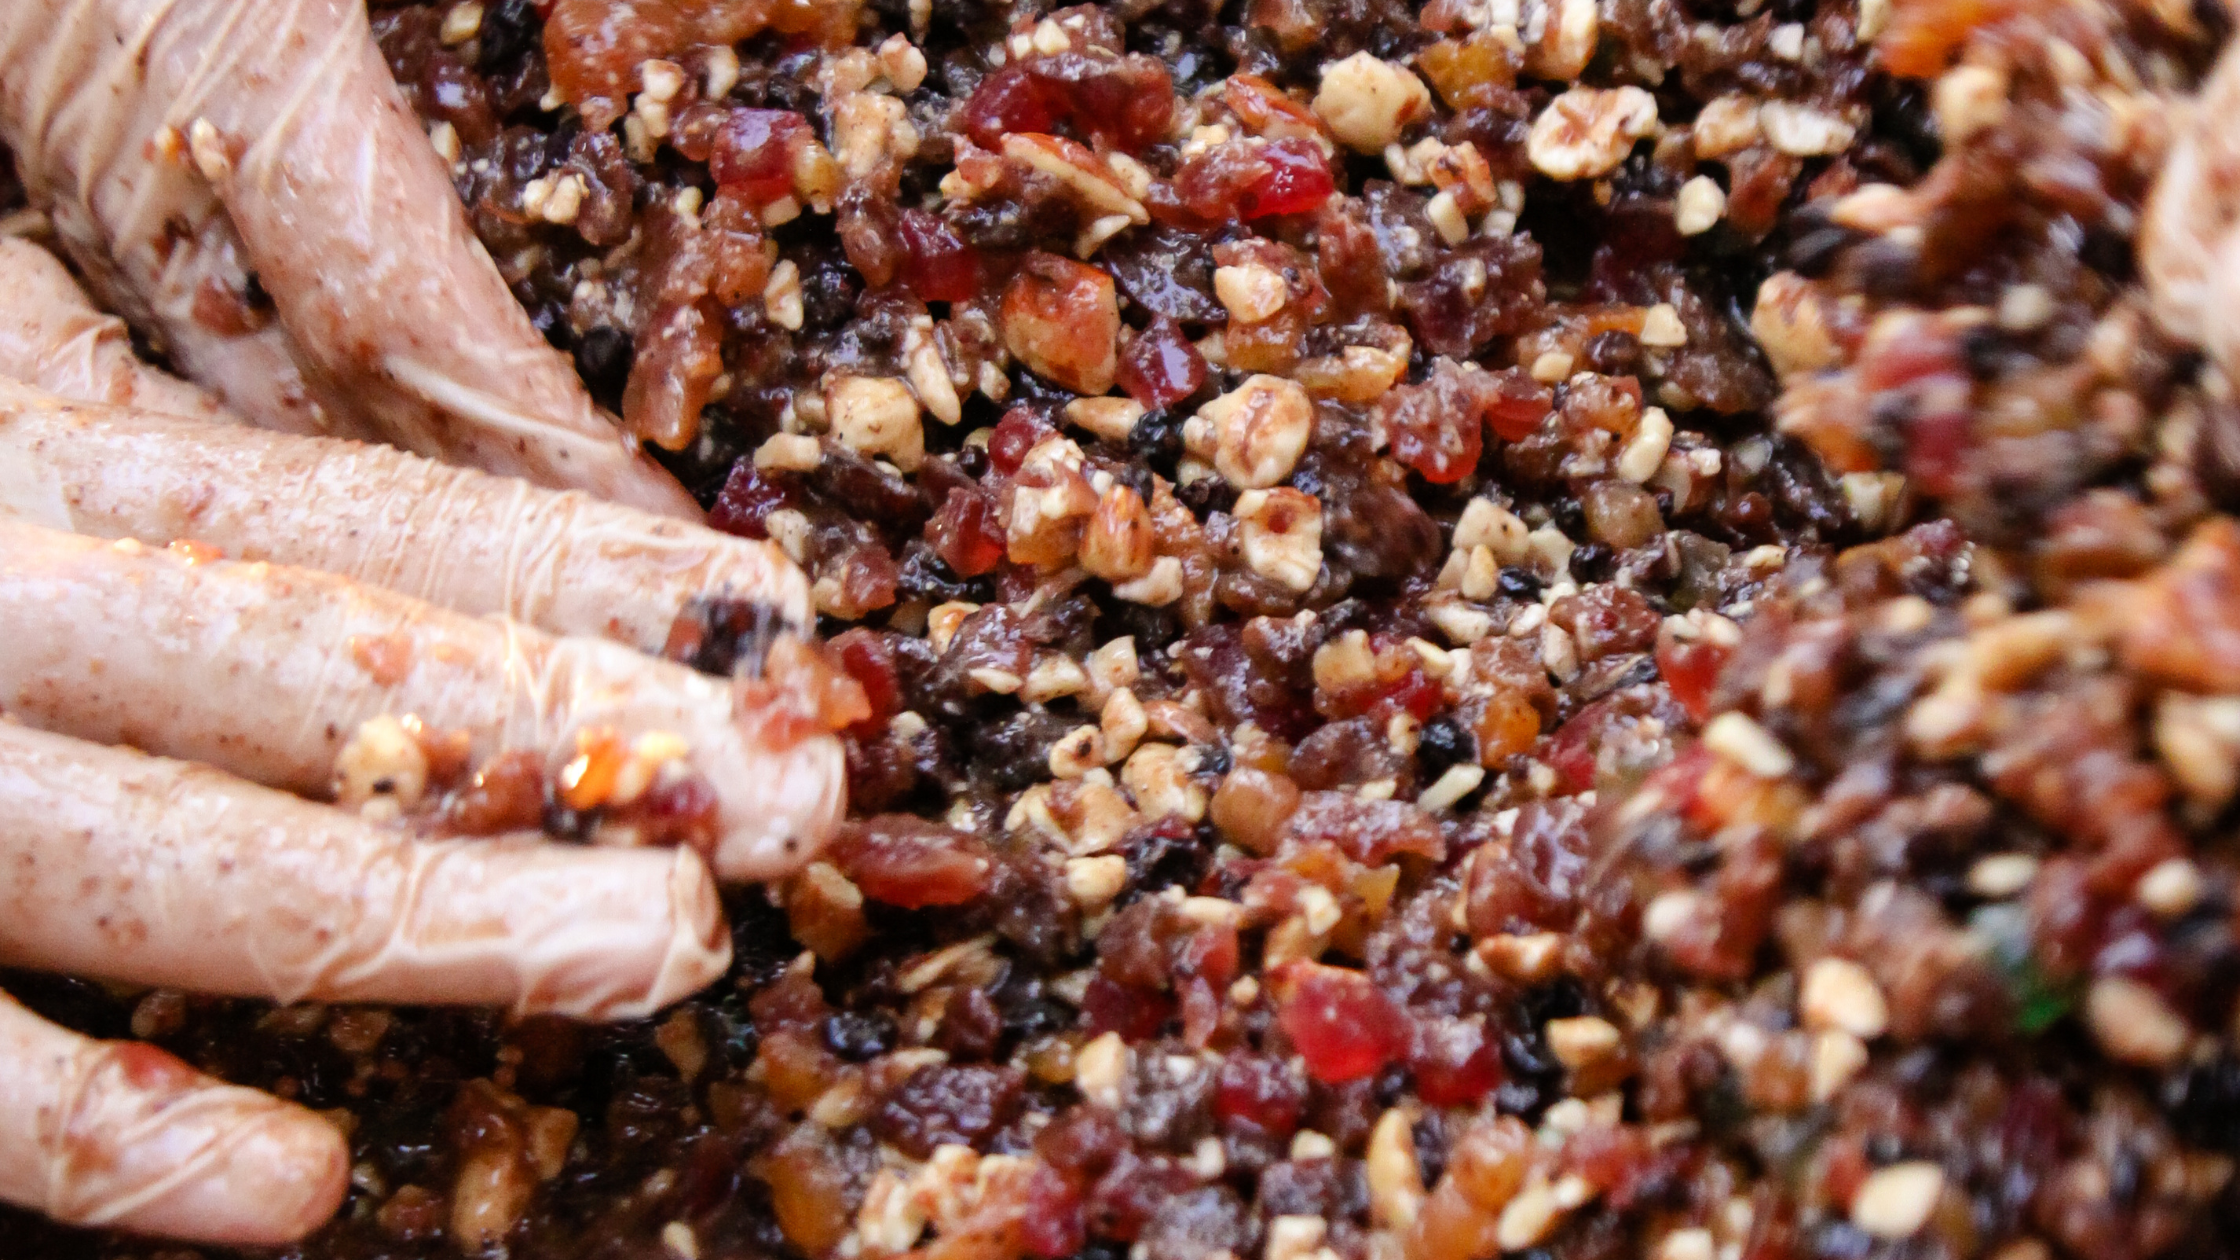 What Is The History Behind Christmas Cake Mixing?